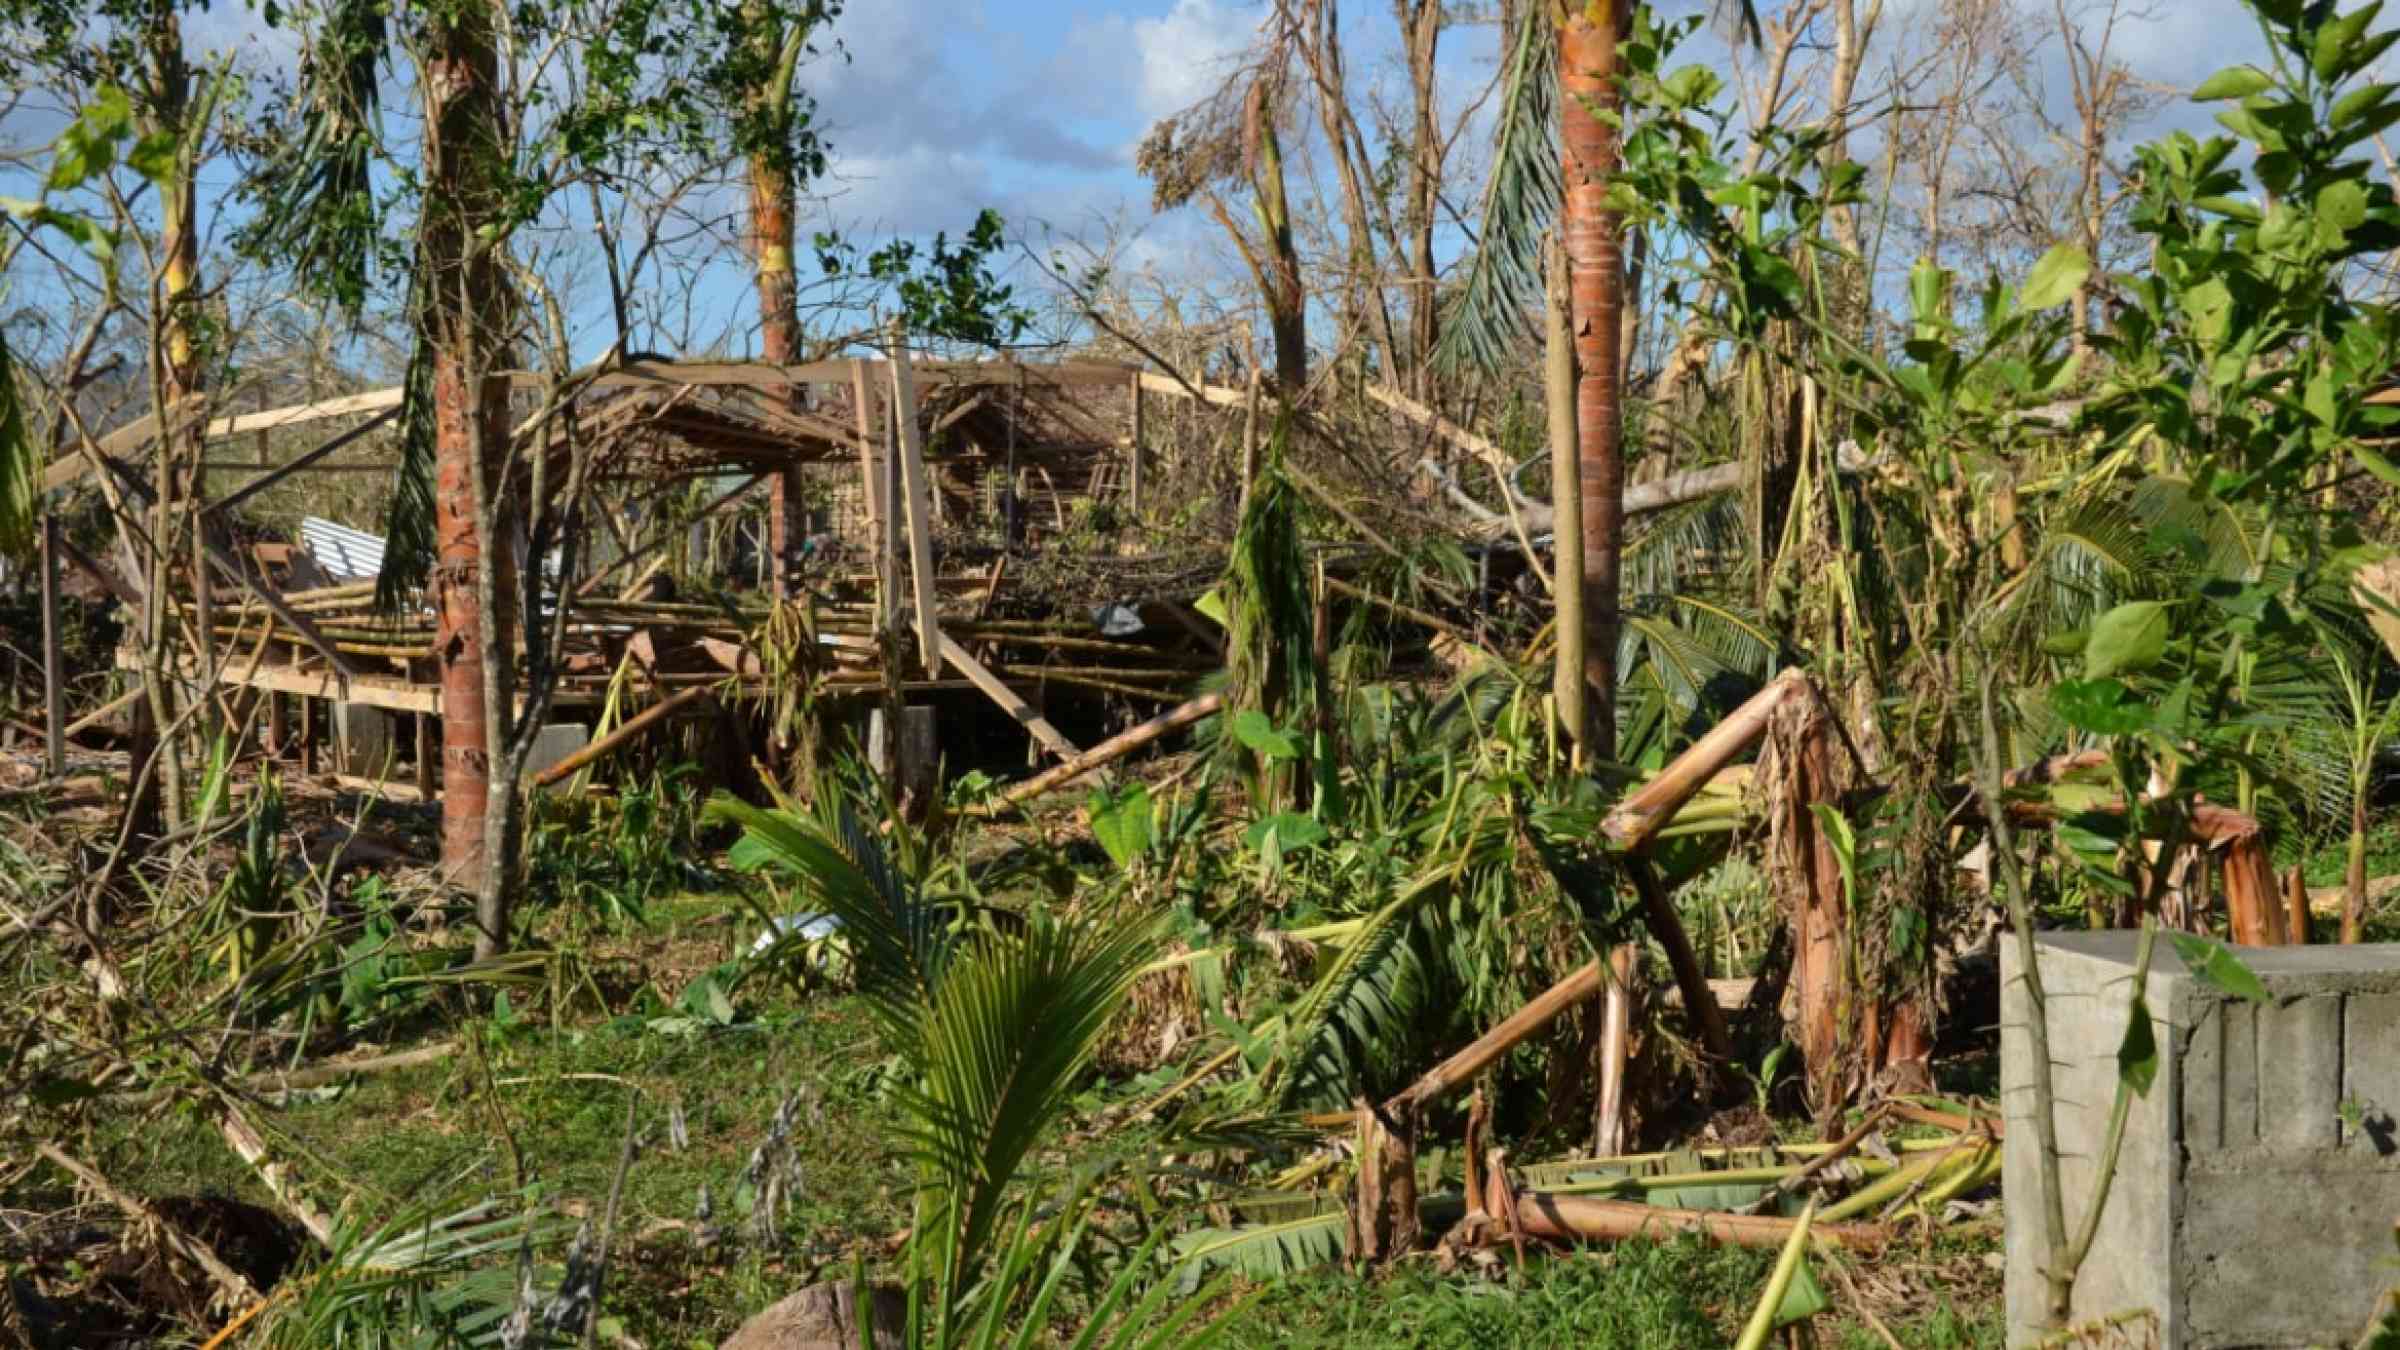 Destroyed house by cyclone Pam that struck Vanuatu in March 2015.